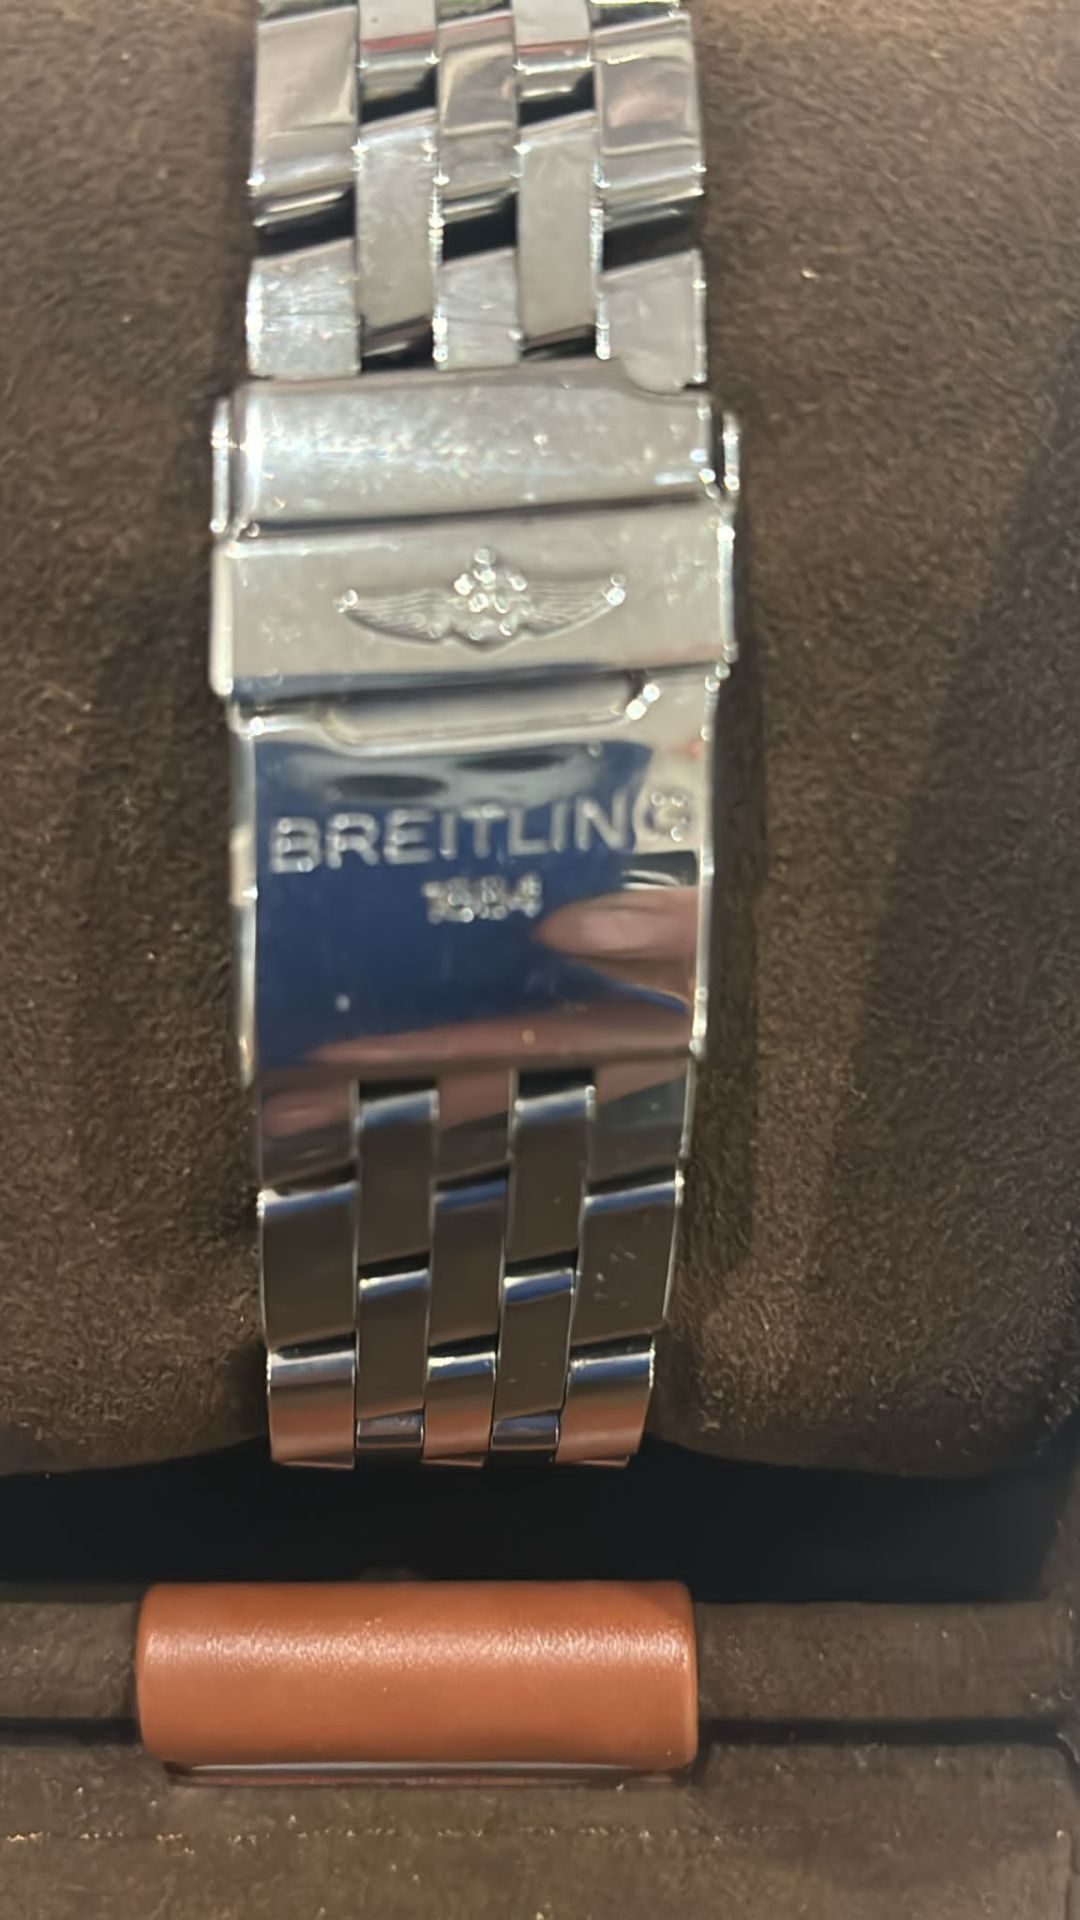 Breitling Chronomat Evolution A13356 Watch - Image 6 of 12